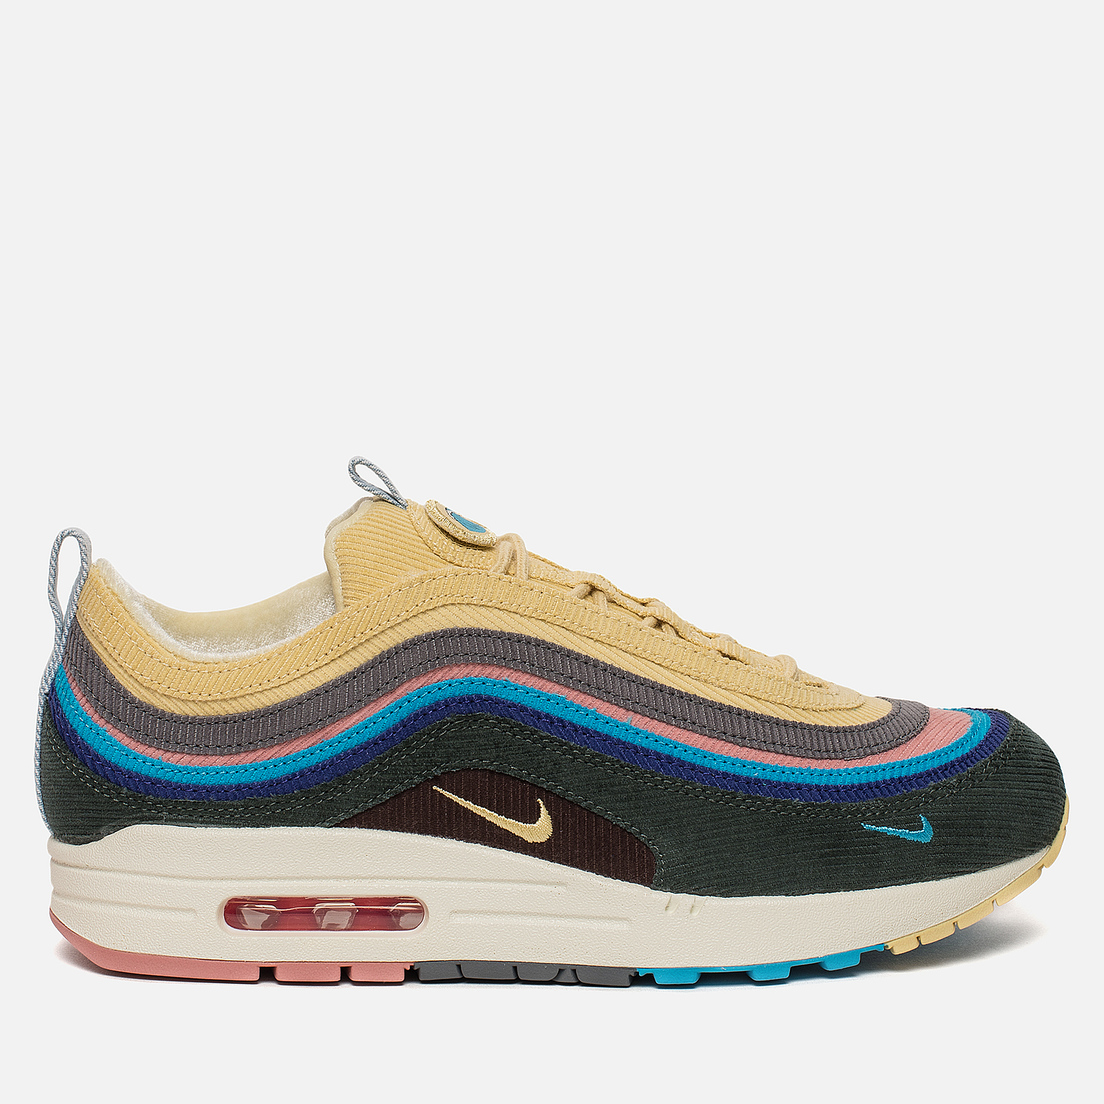 sean wotherspoon air max blue